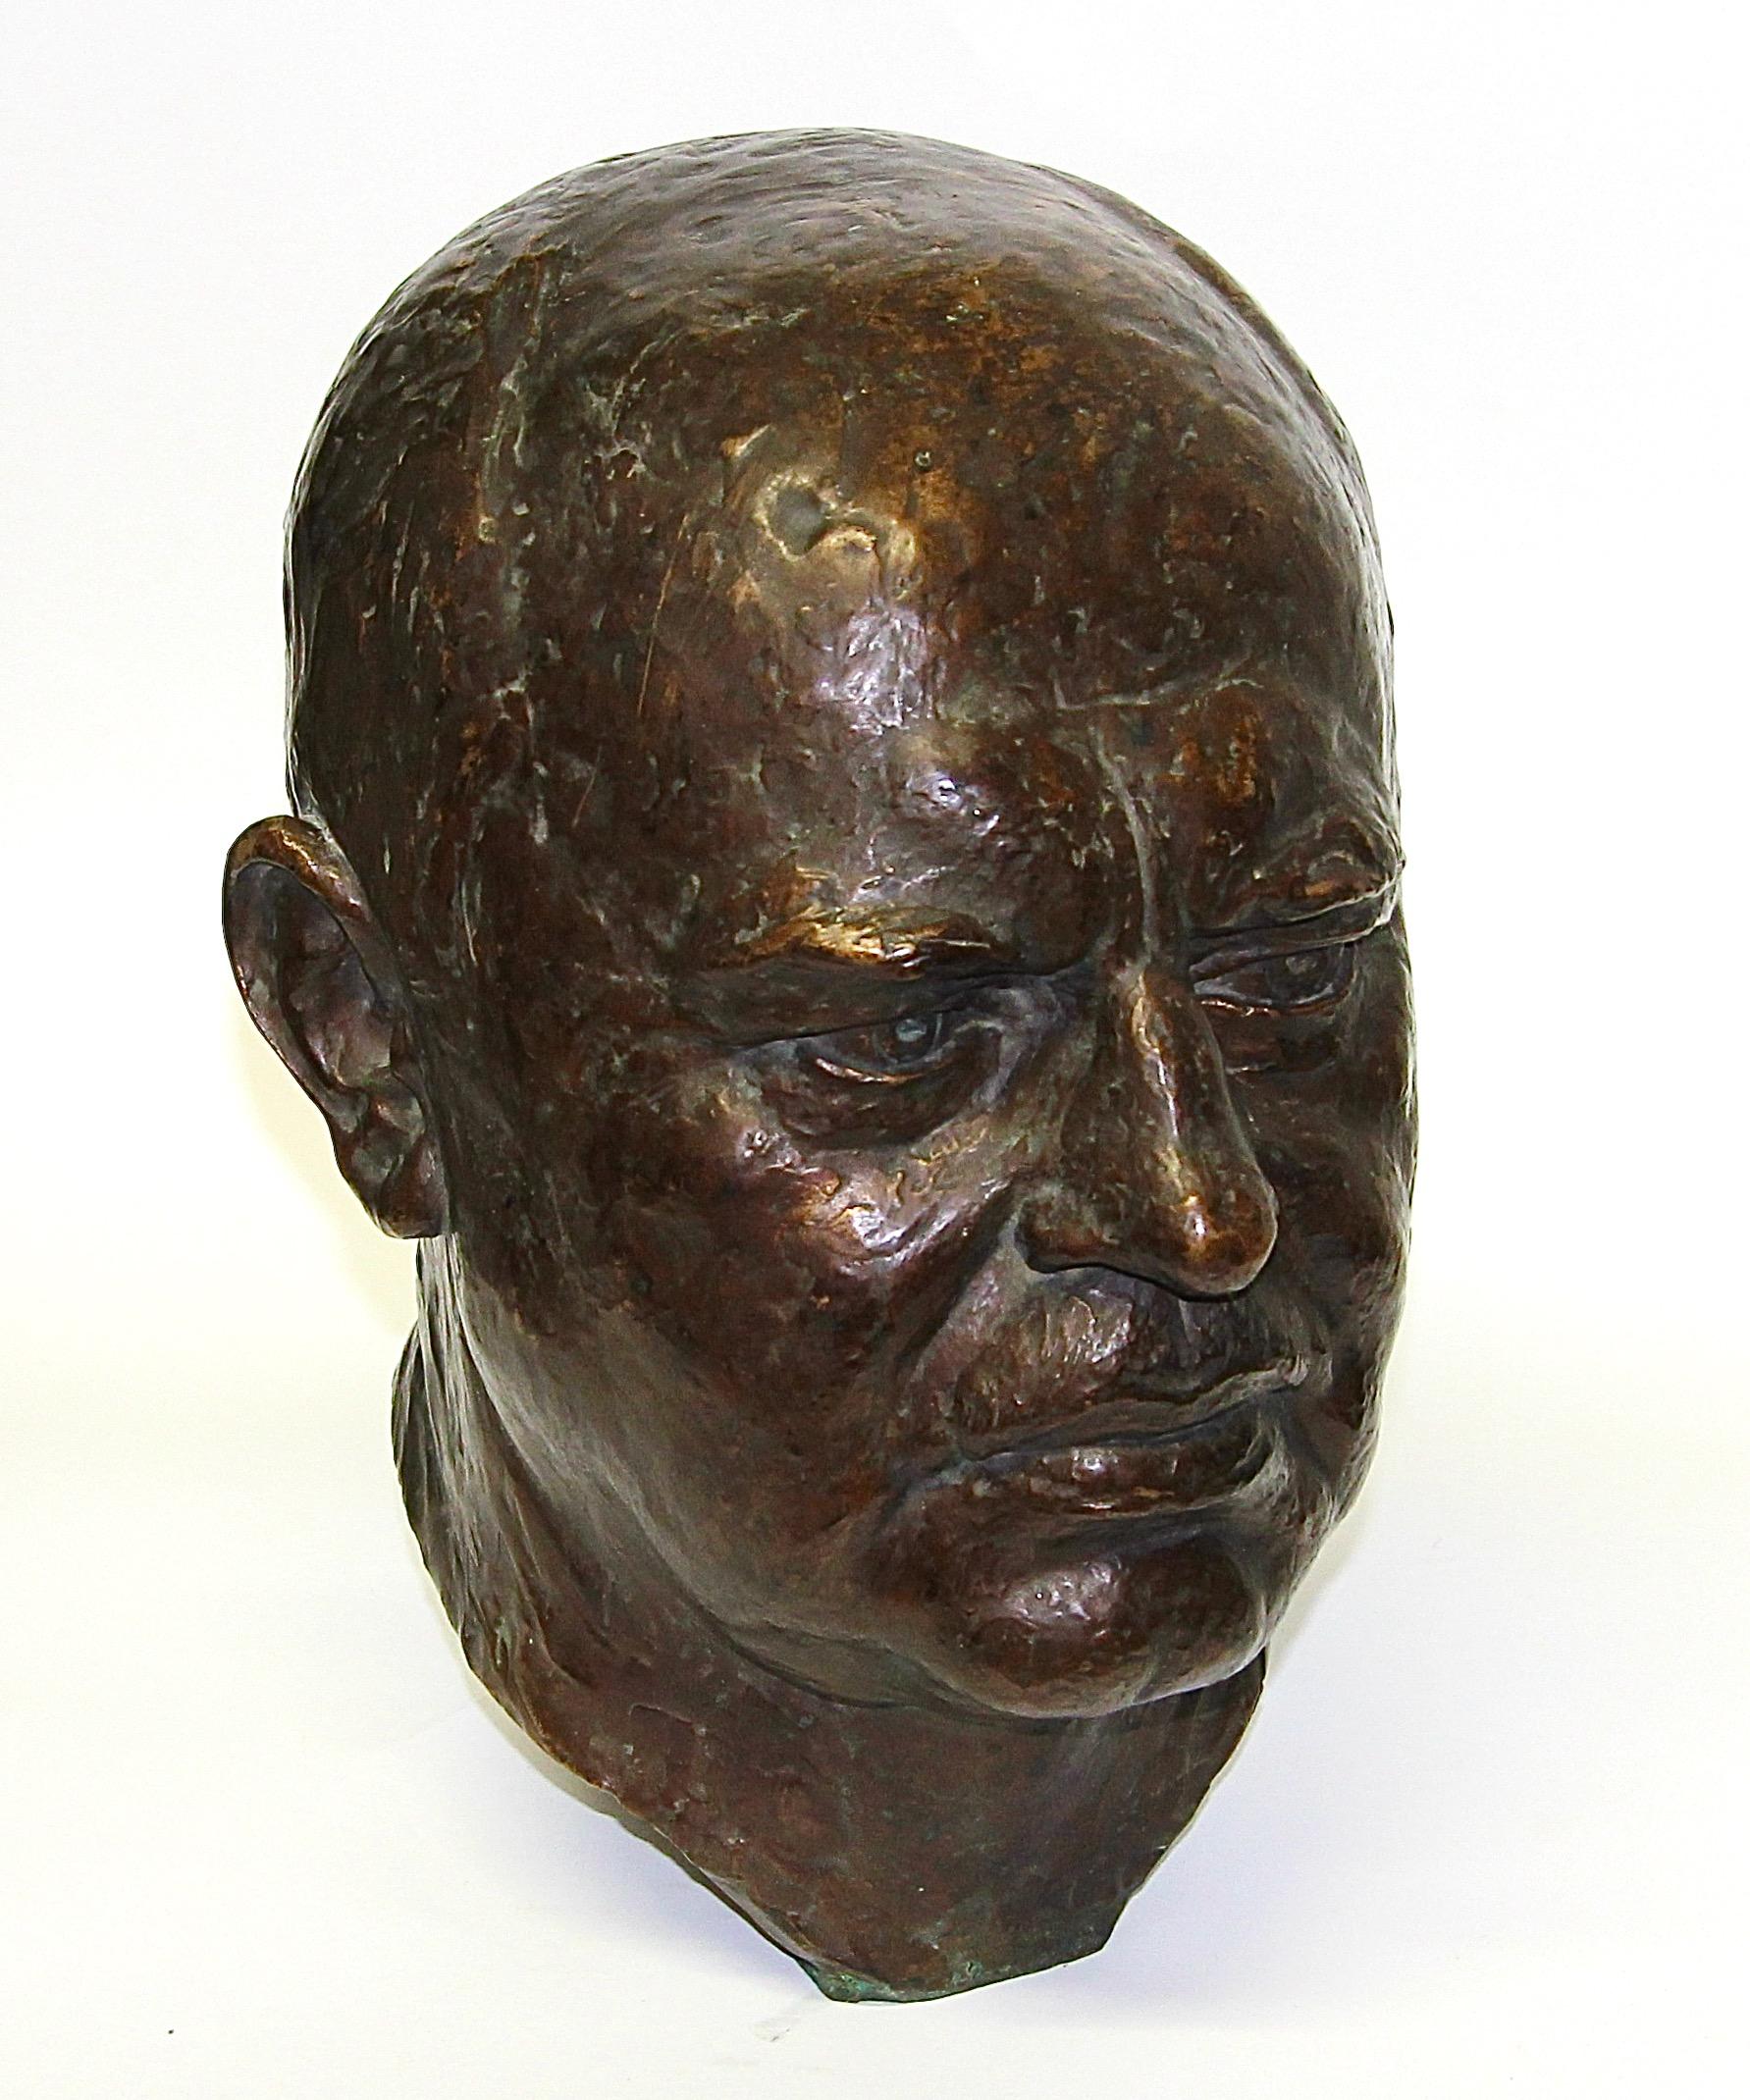 Detailed bronze bust, sculpture of a man, by Felix Georg Pfeifer, 1929

Felix Georg Pfeifer (born November 9, 1871 in Leipzig; died March 6, 1945 there) was a German sculptor and medalist.